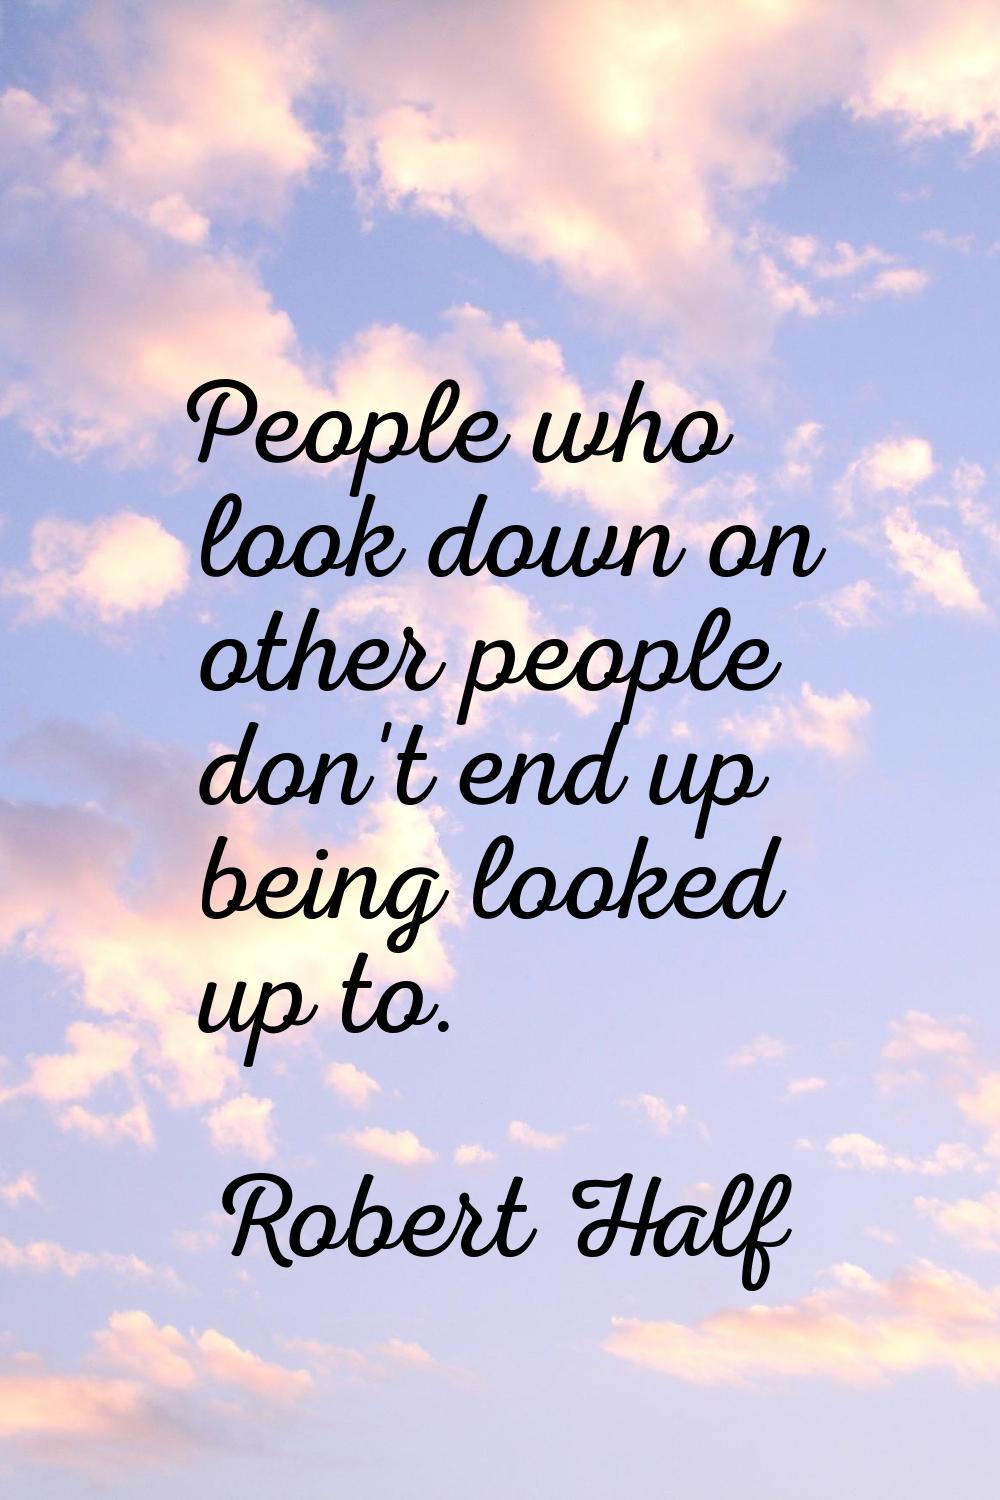 People who look down on other people don't end up being looked up to.